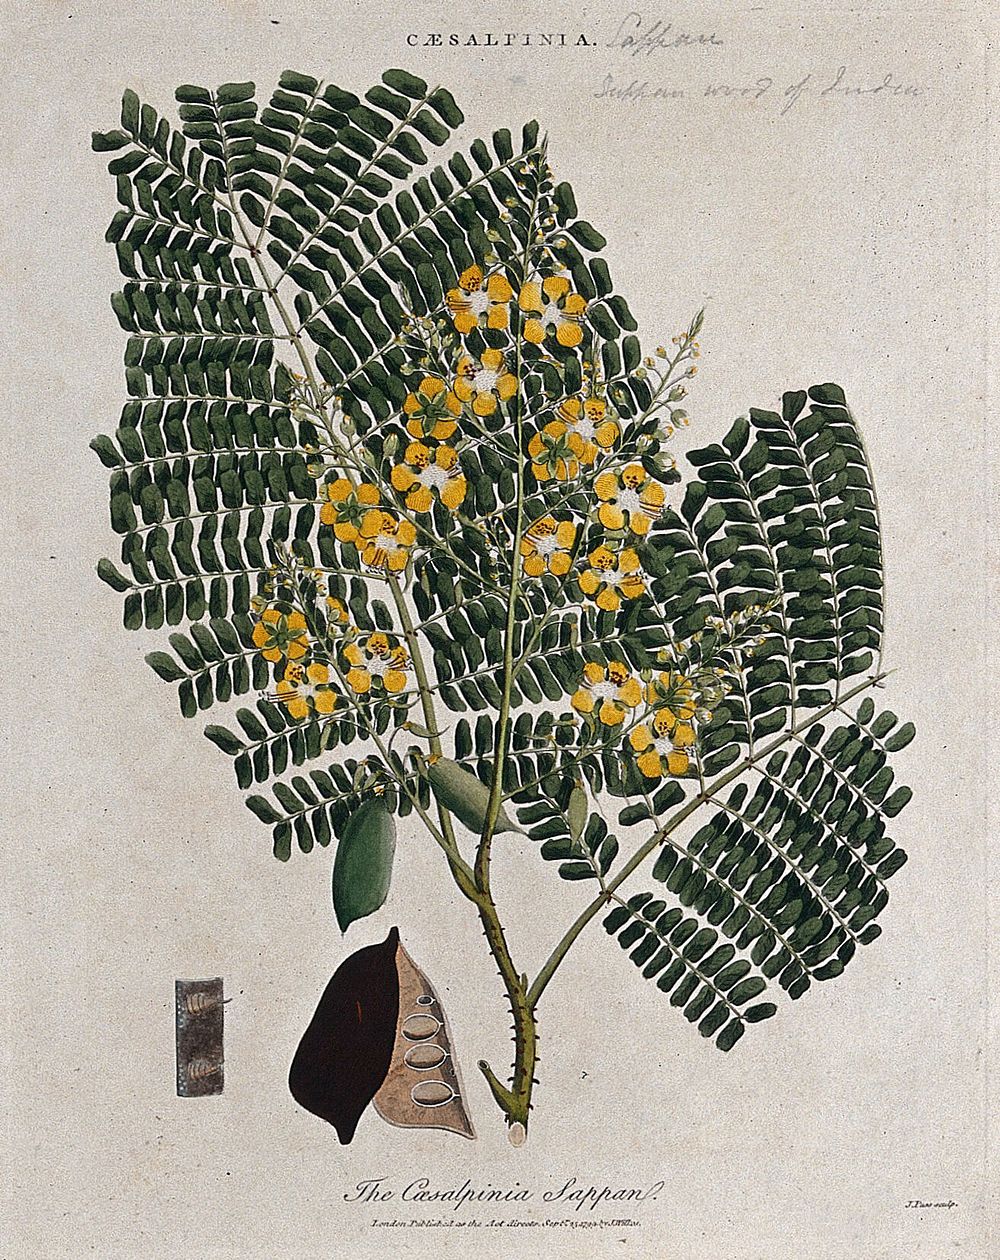 Sappanwood tree (Caesalpinia sappan): flowering branch, pod and thorns. Coloured etching by J. Pass, c. 1799, after J. Ihle.